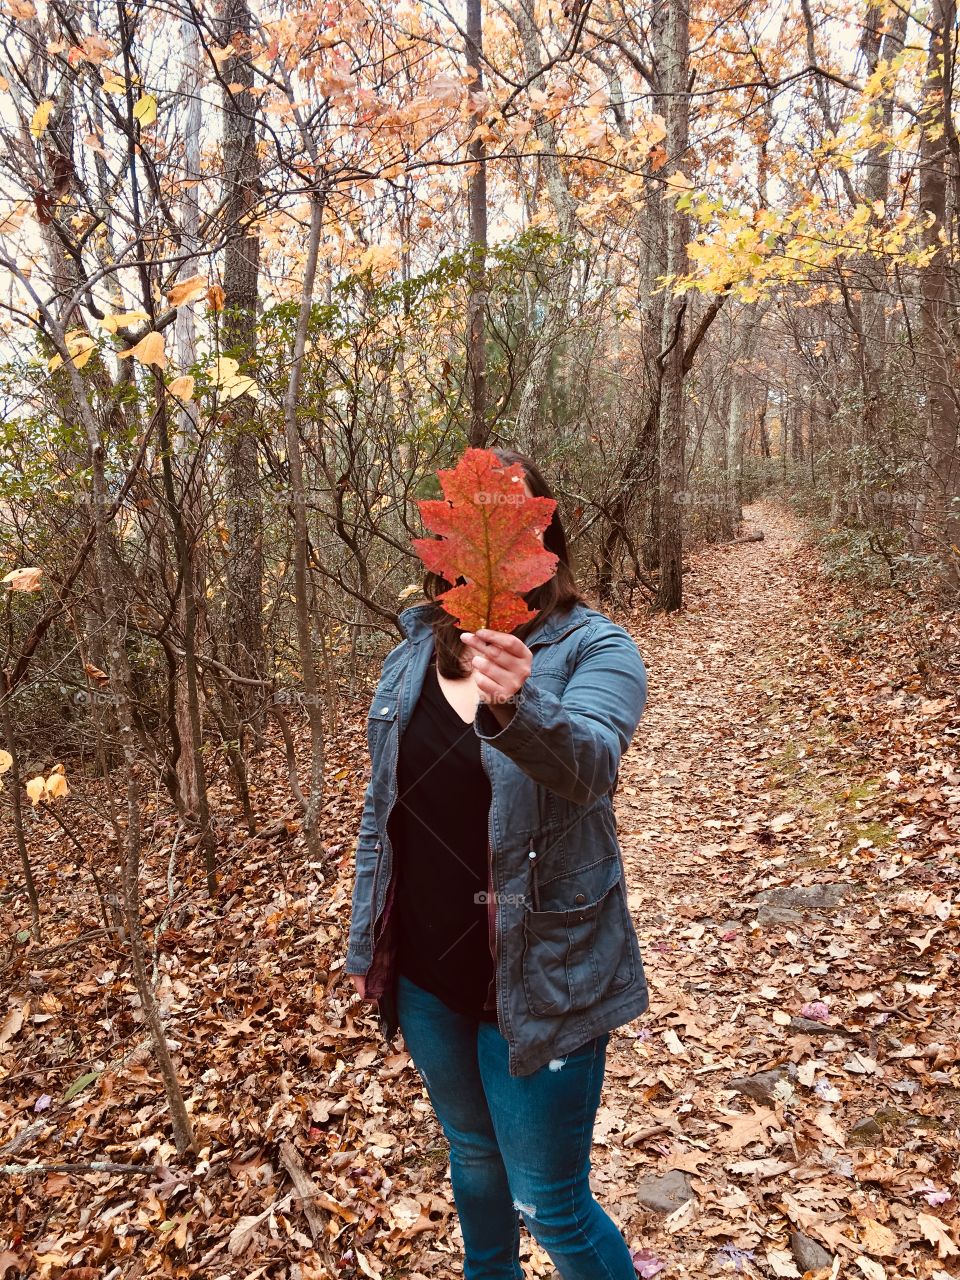 Giant fall leaf covers women’s face.